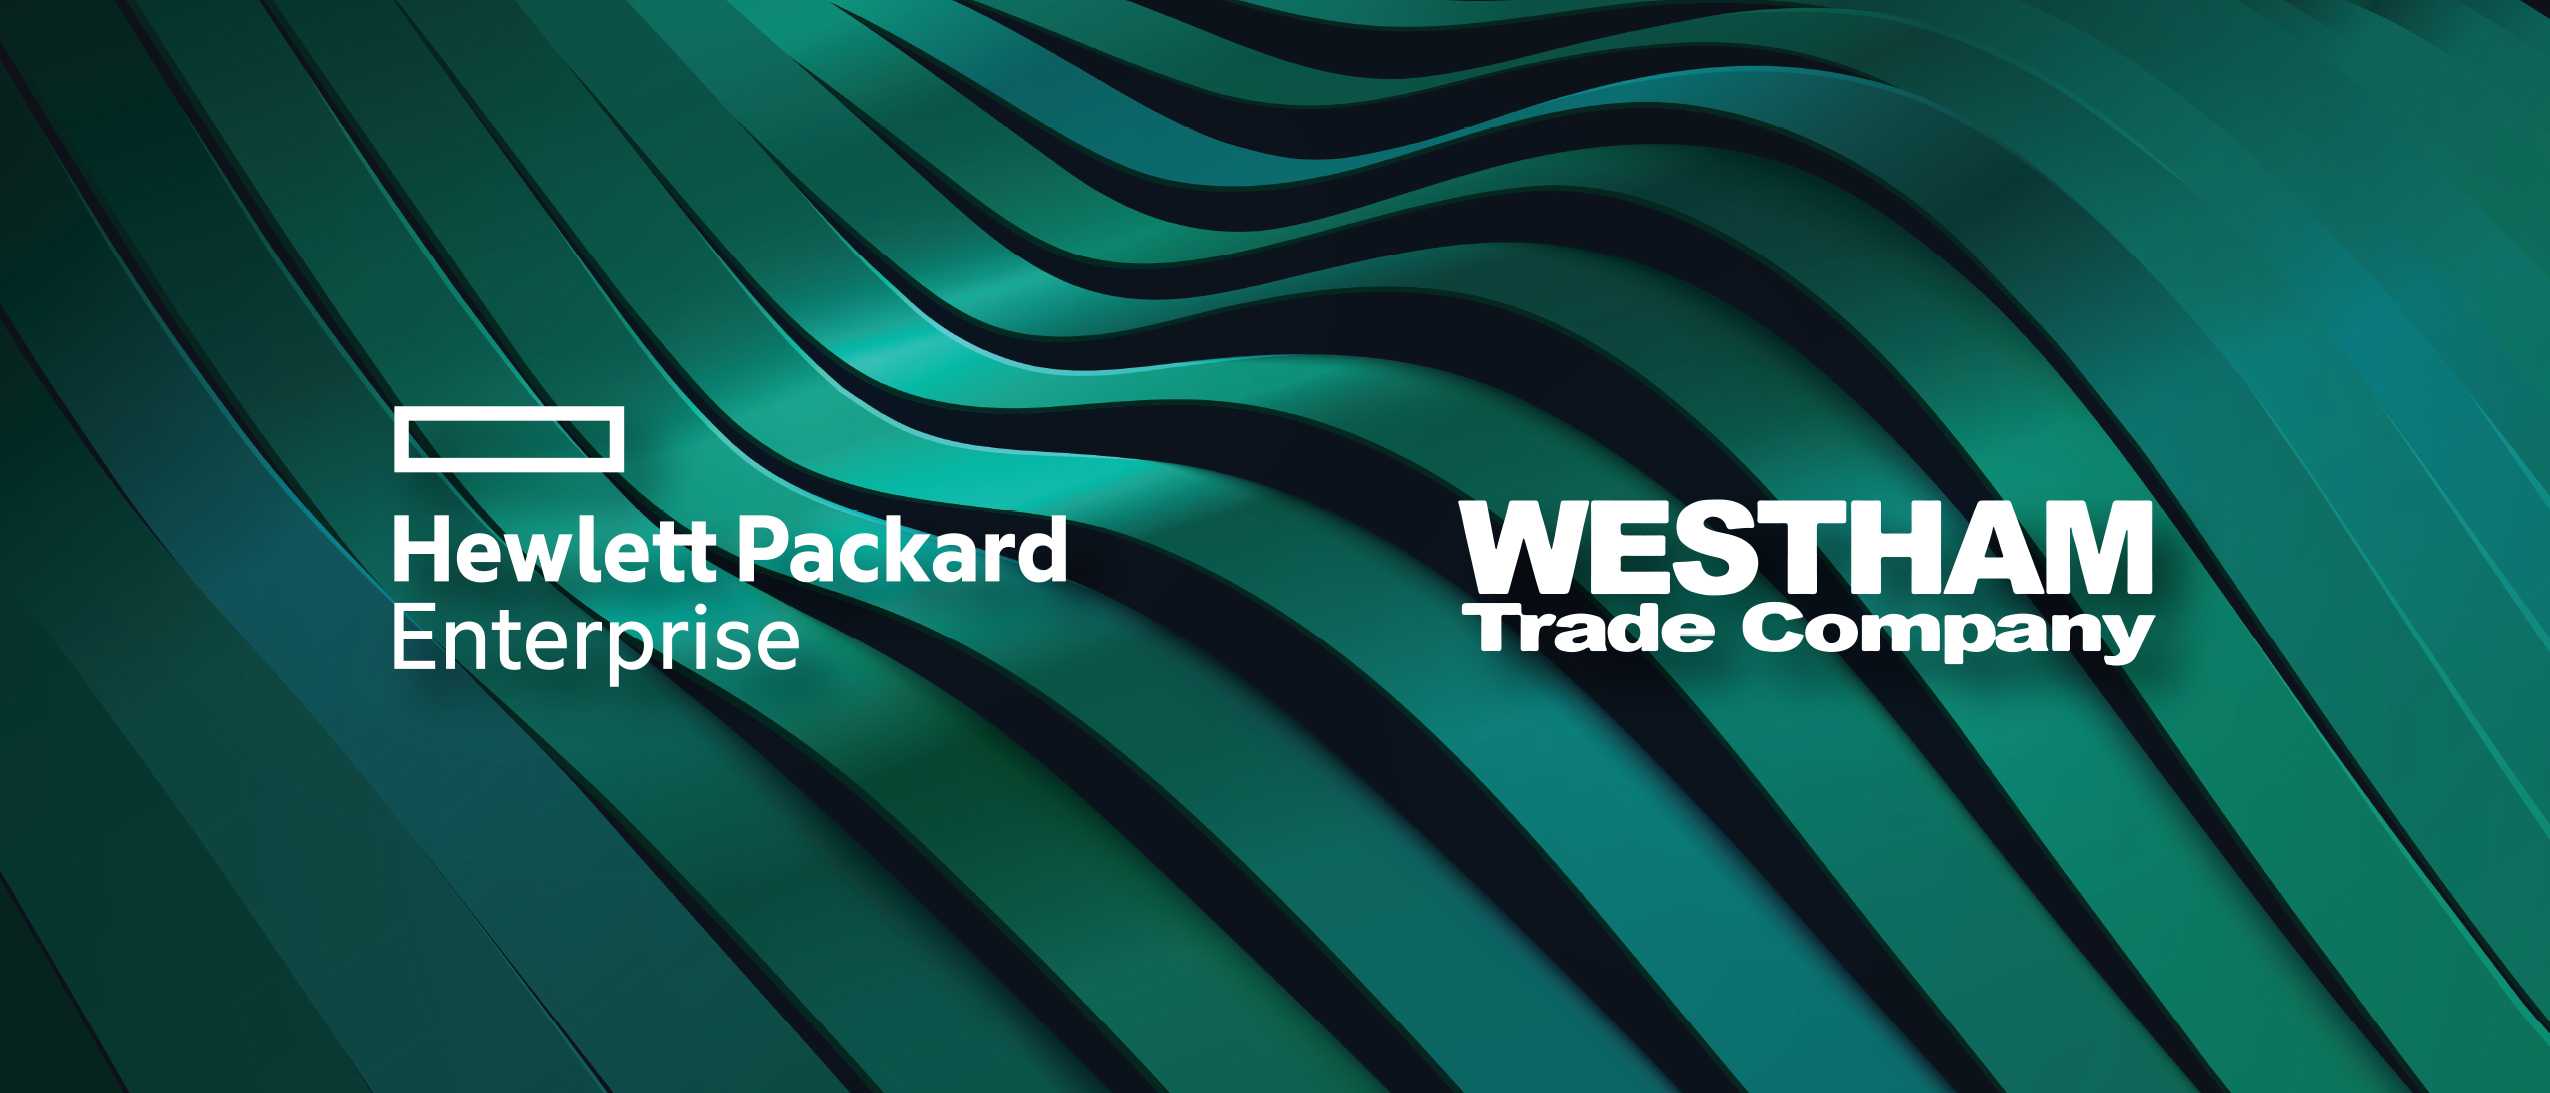 HPE Discover 2023 - Edge-To-Cloud Conference - Las Vegas, June 20